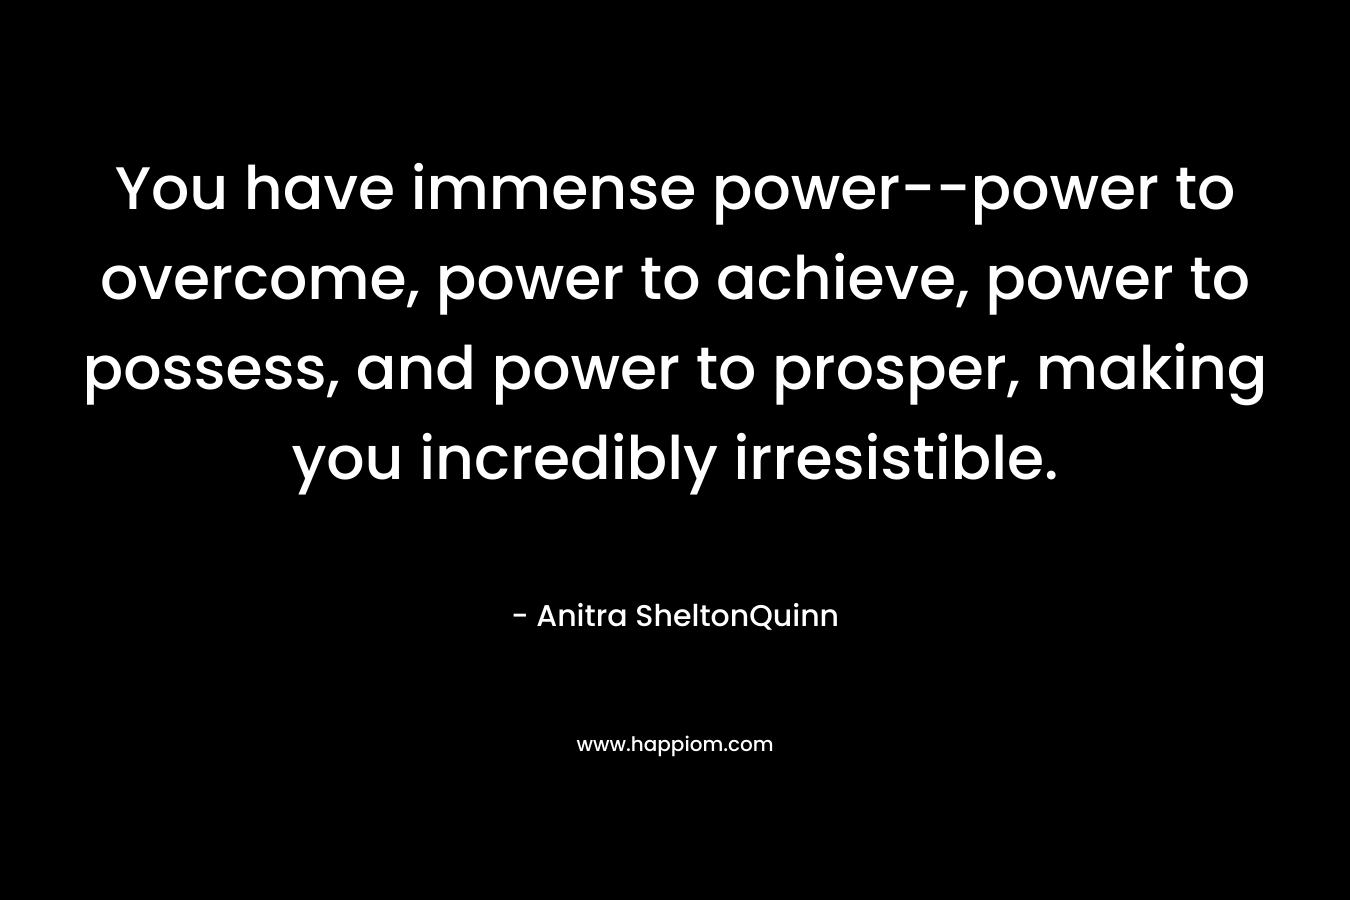 You have immense power--power to overcome, power to achieve, power to possess, and power to prosper, making you incredibly irresistible.